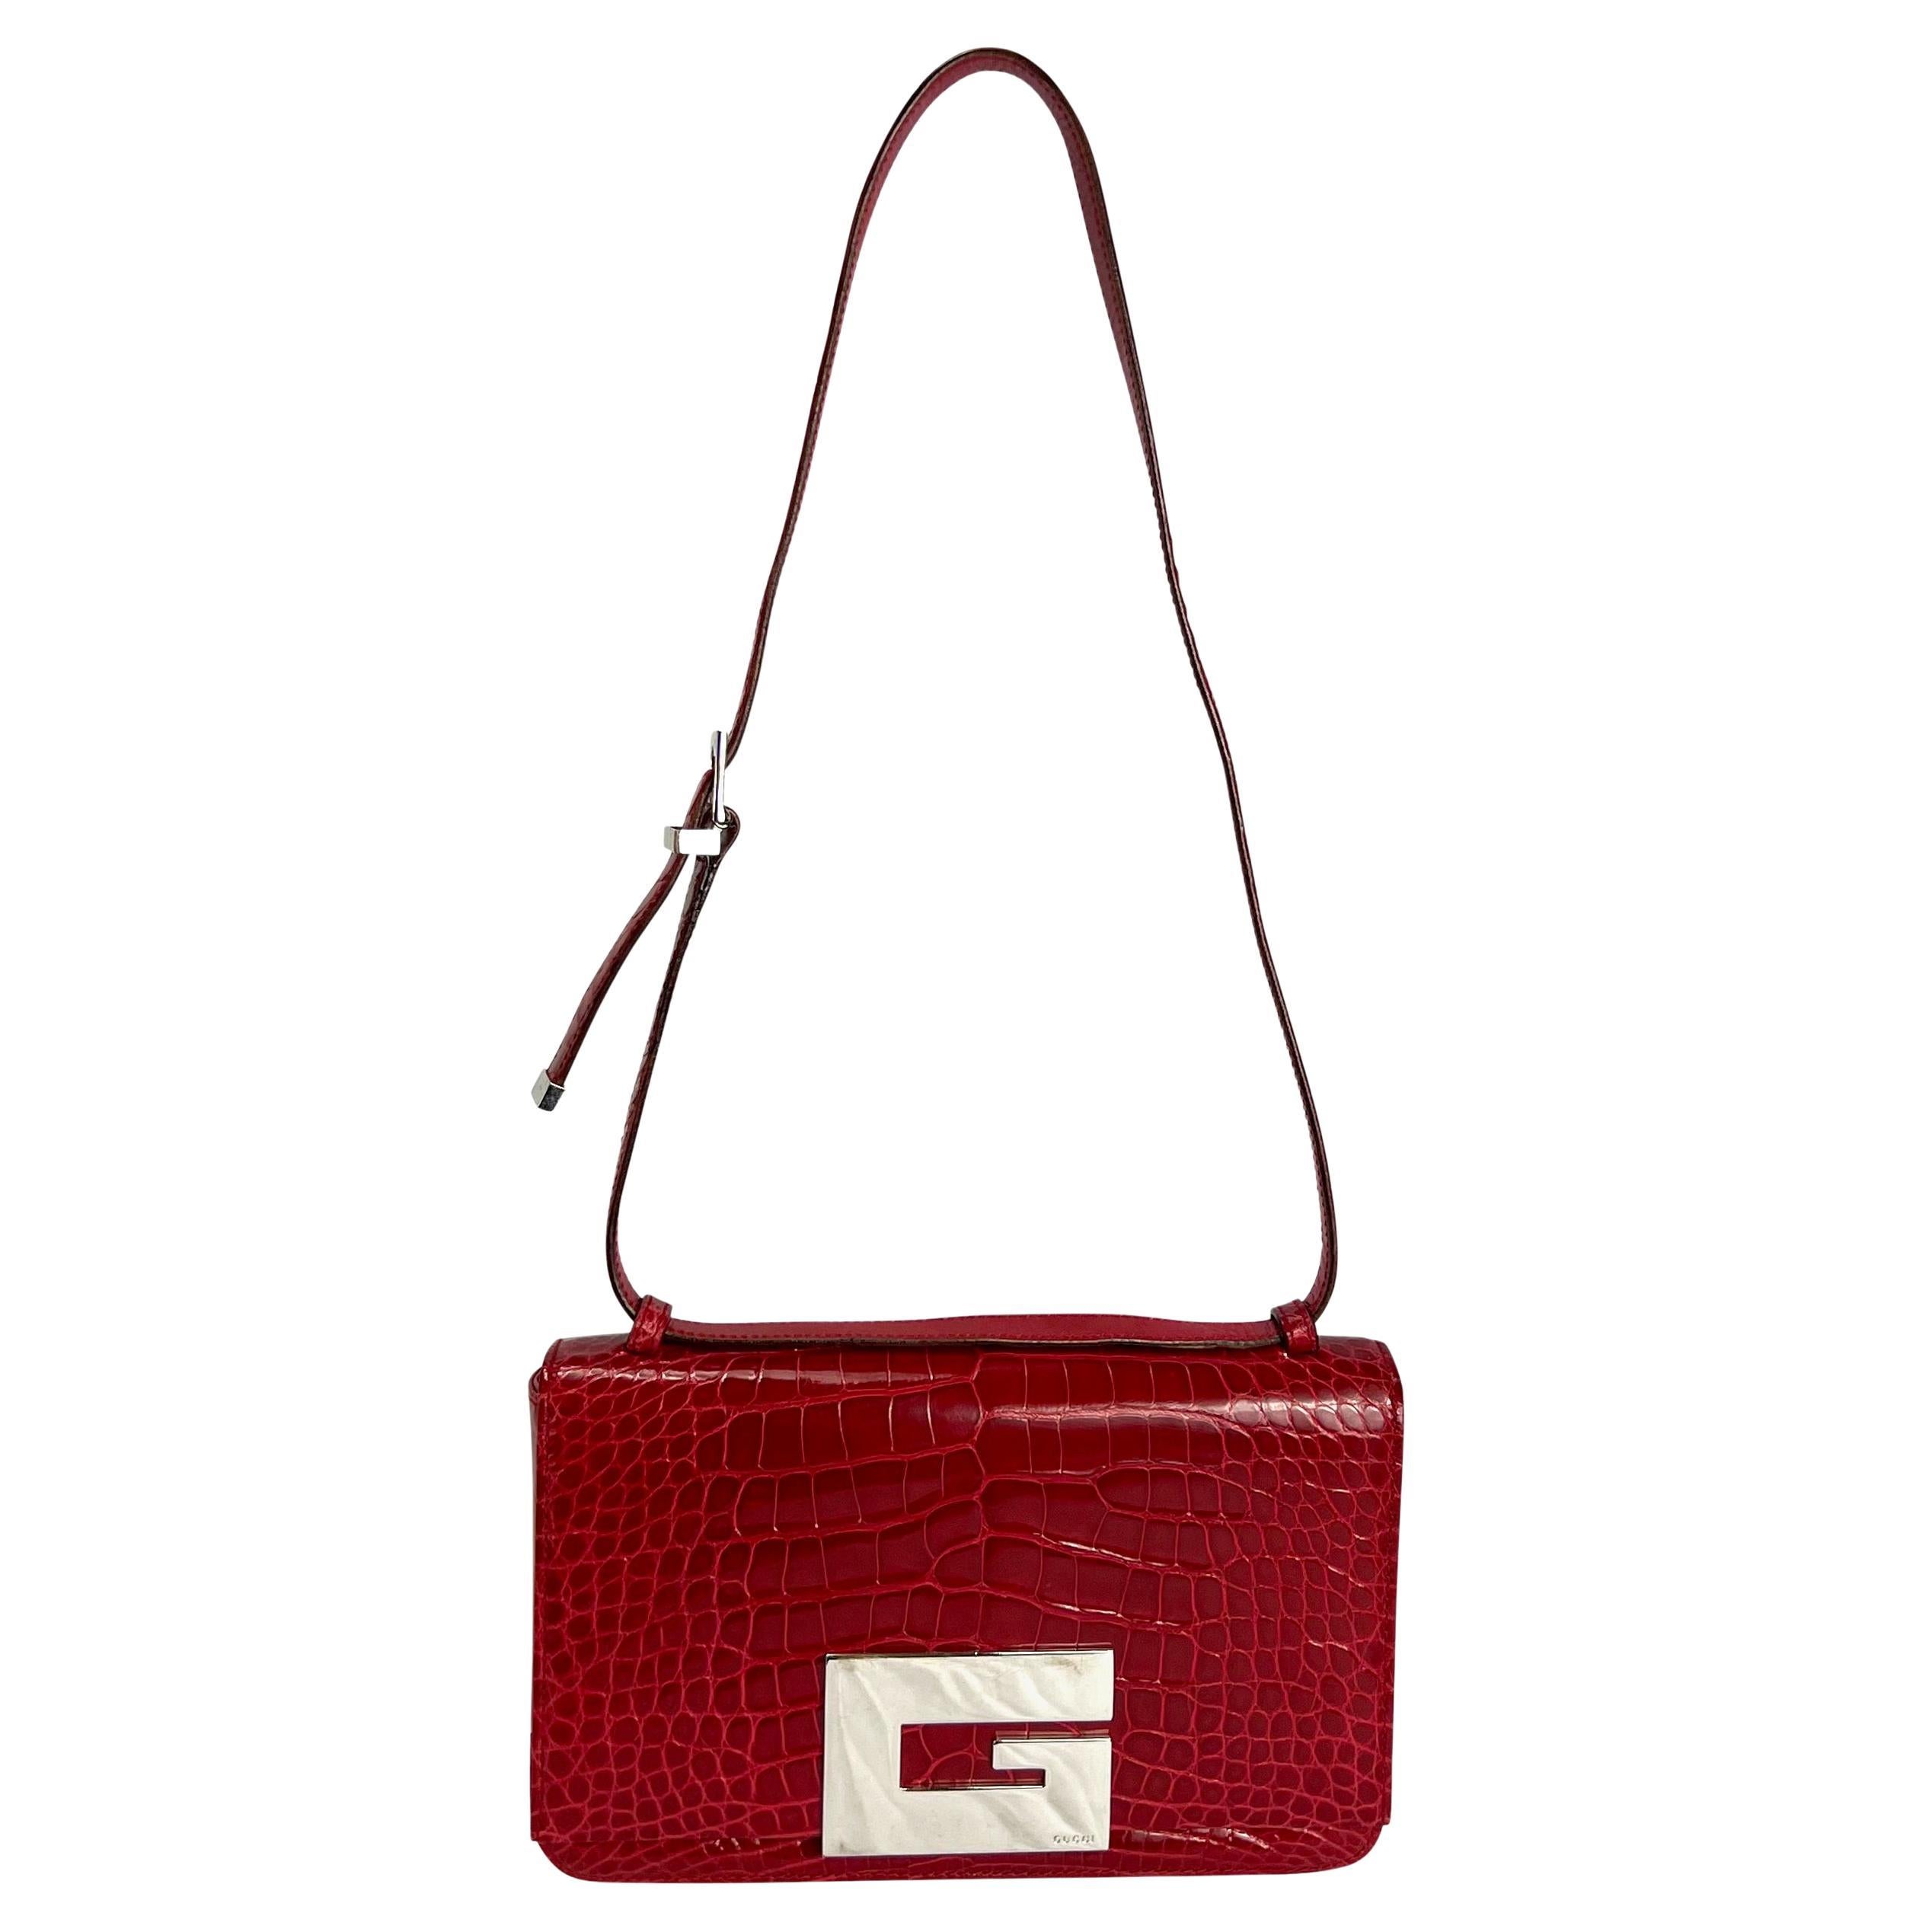 S/S 1998 Gucci by Tom Ford Runway Red Alligator Adjustable Crossbody G Logo Bag For Sale